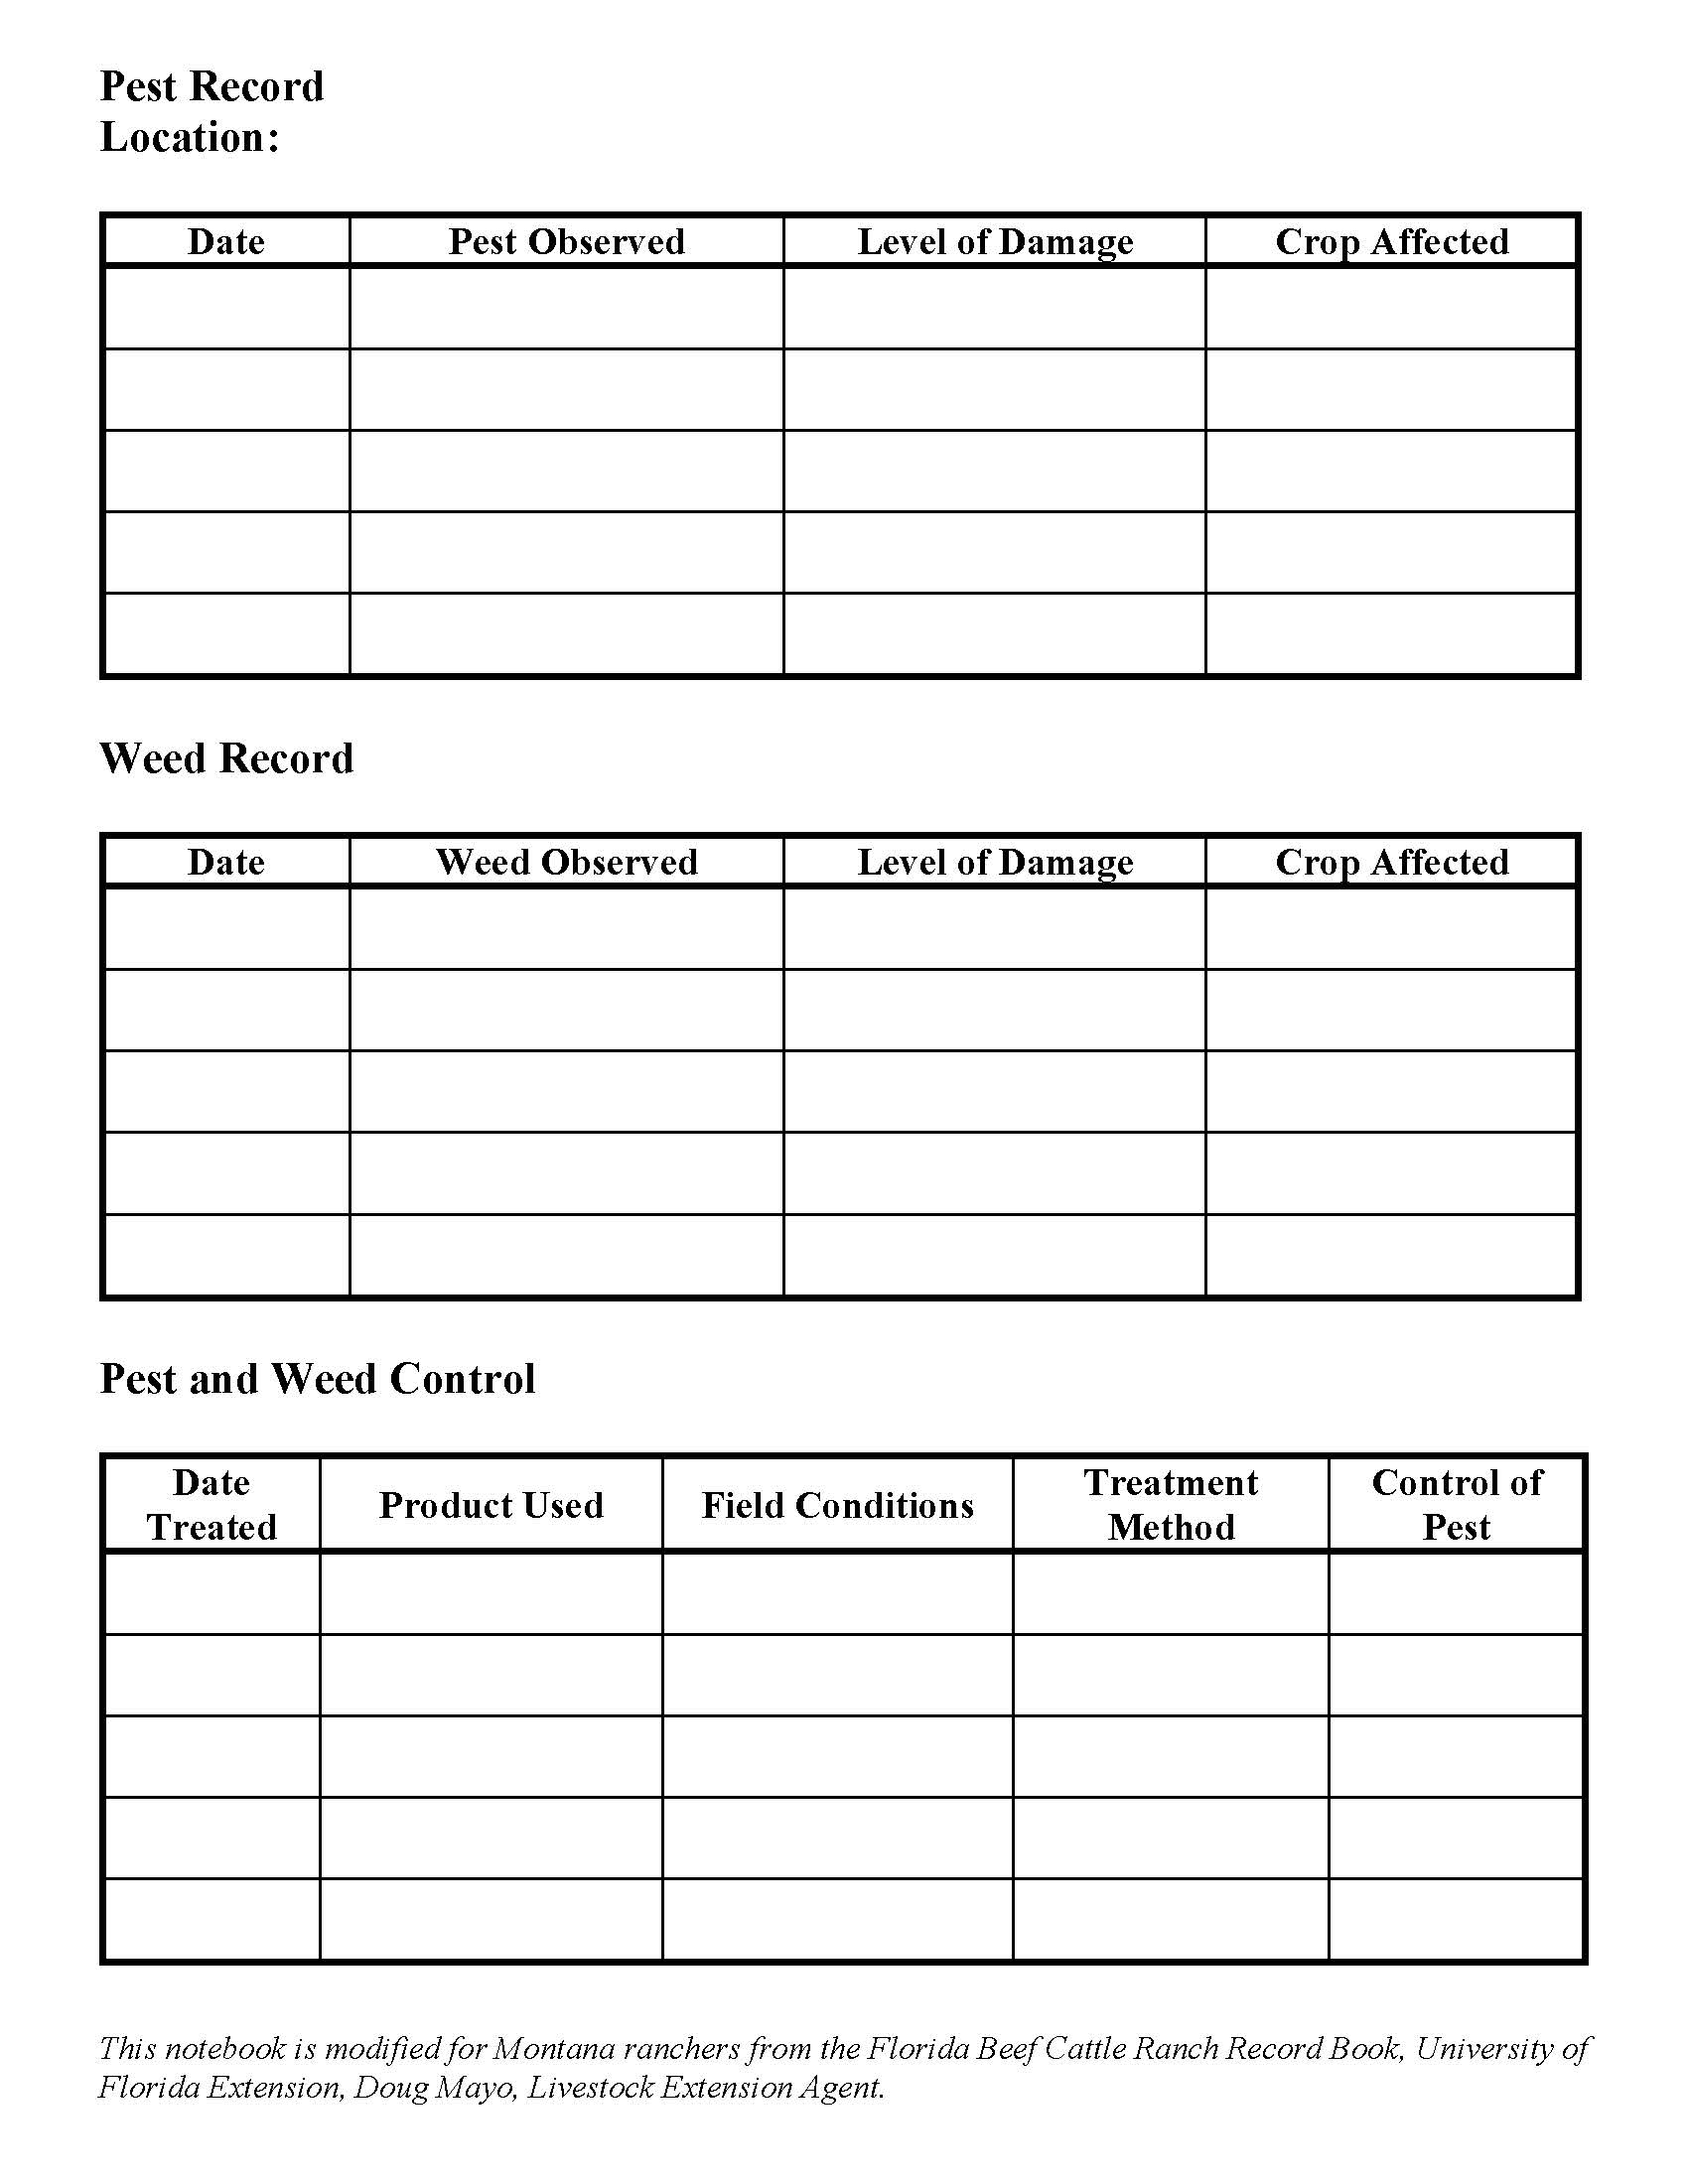 A sample table for keeping records of pests on your property. Another information tool for the ranchers notebook.